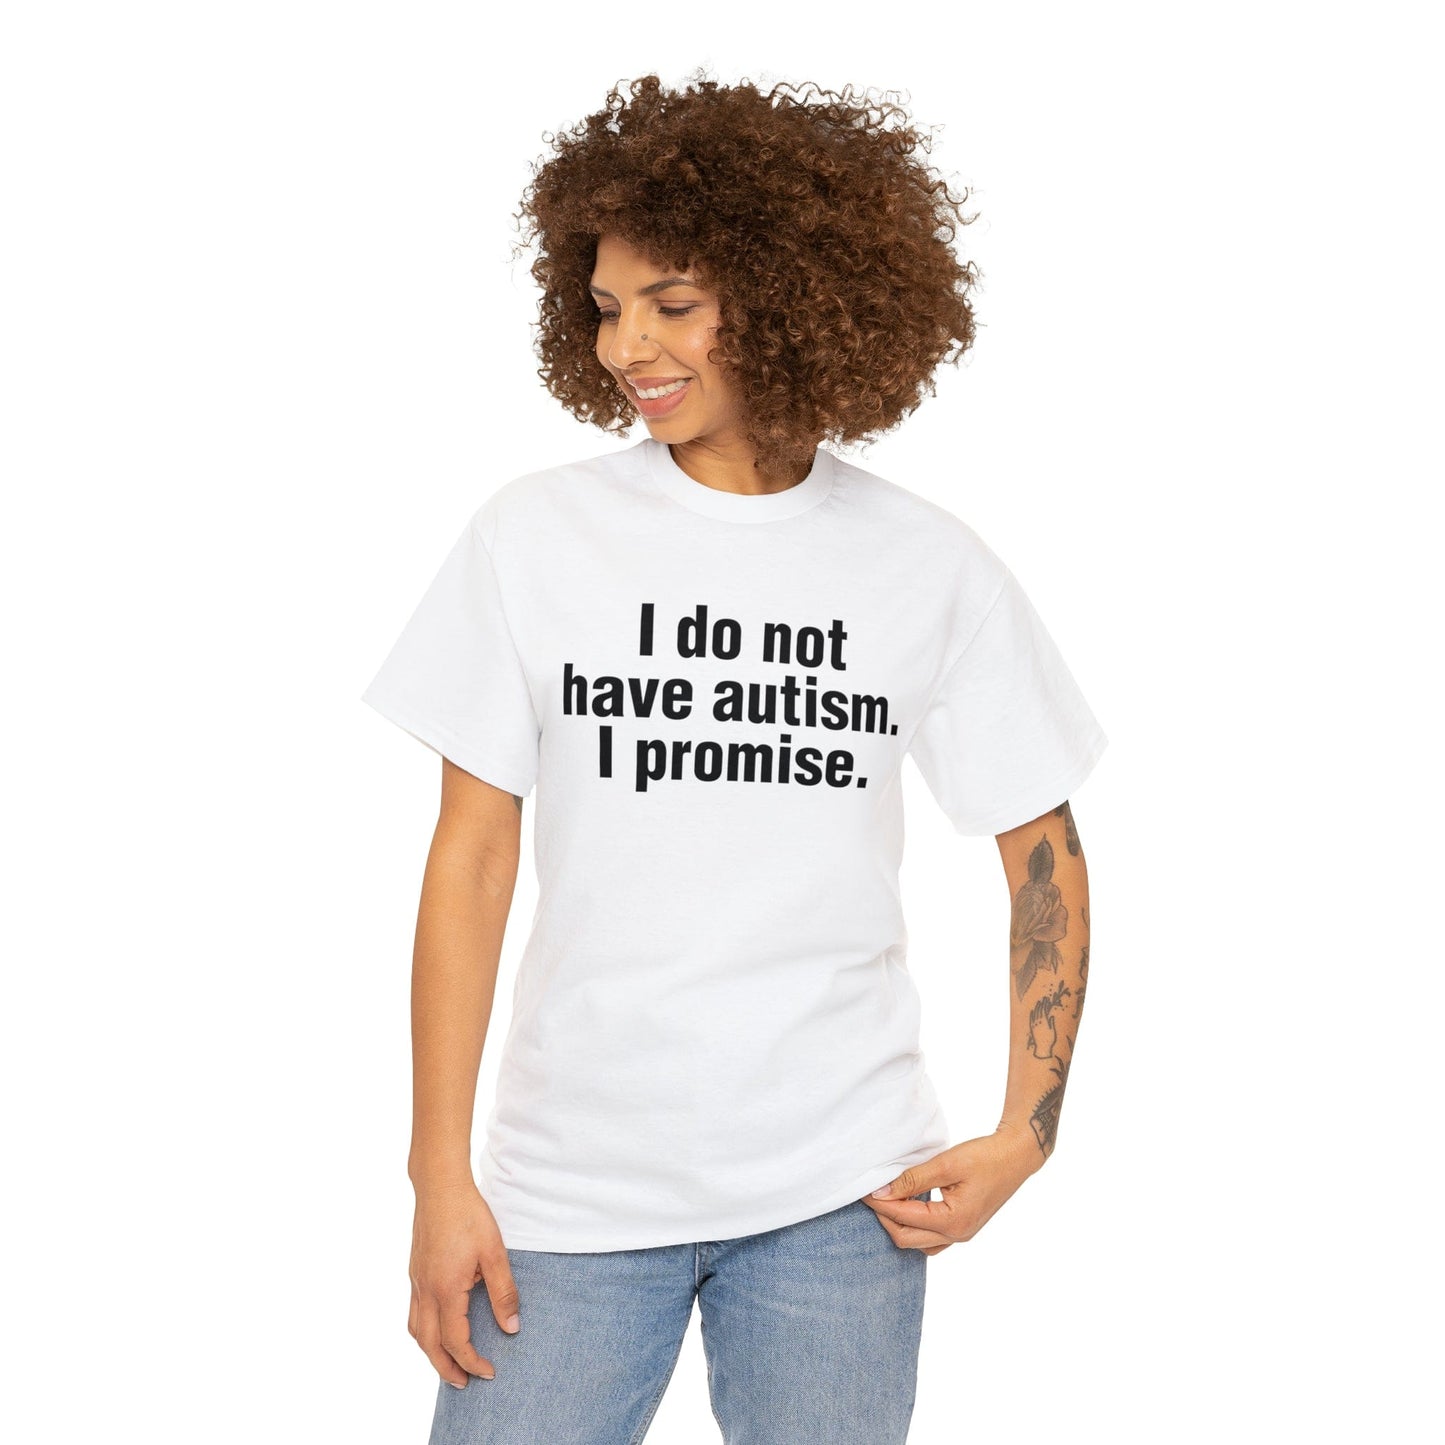 I do not have autism. I promise.